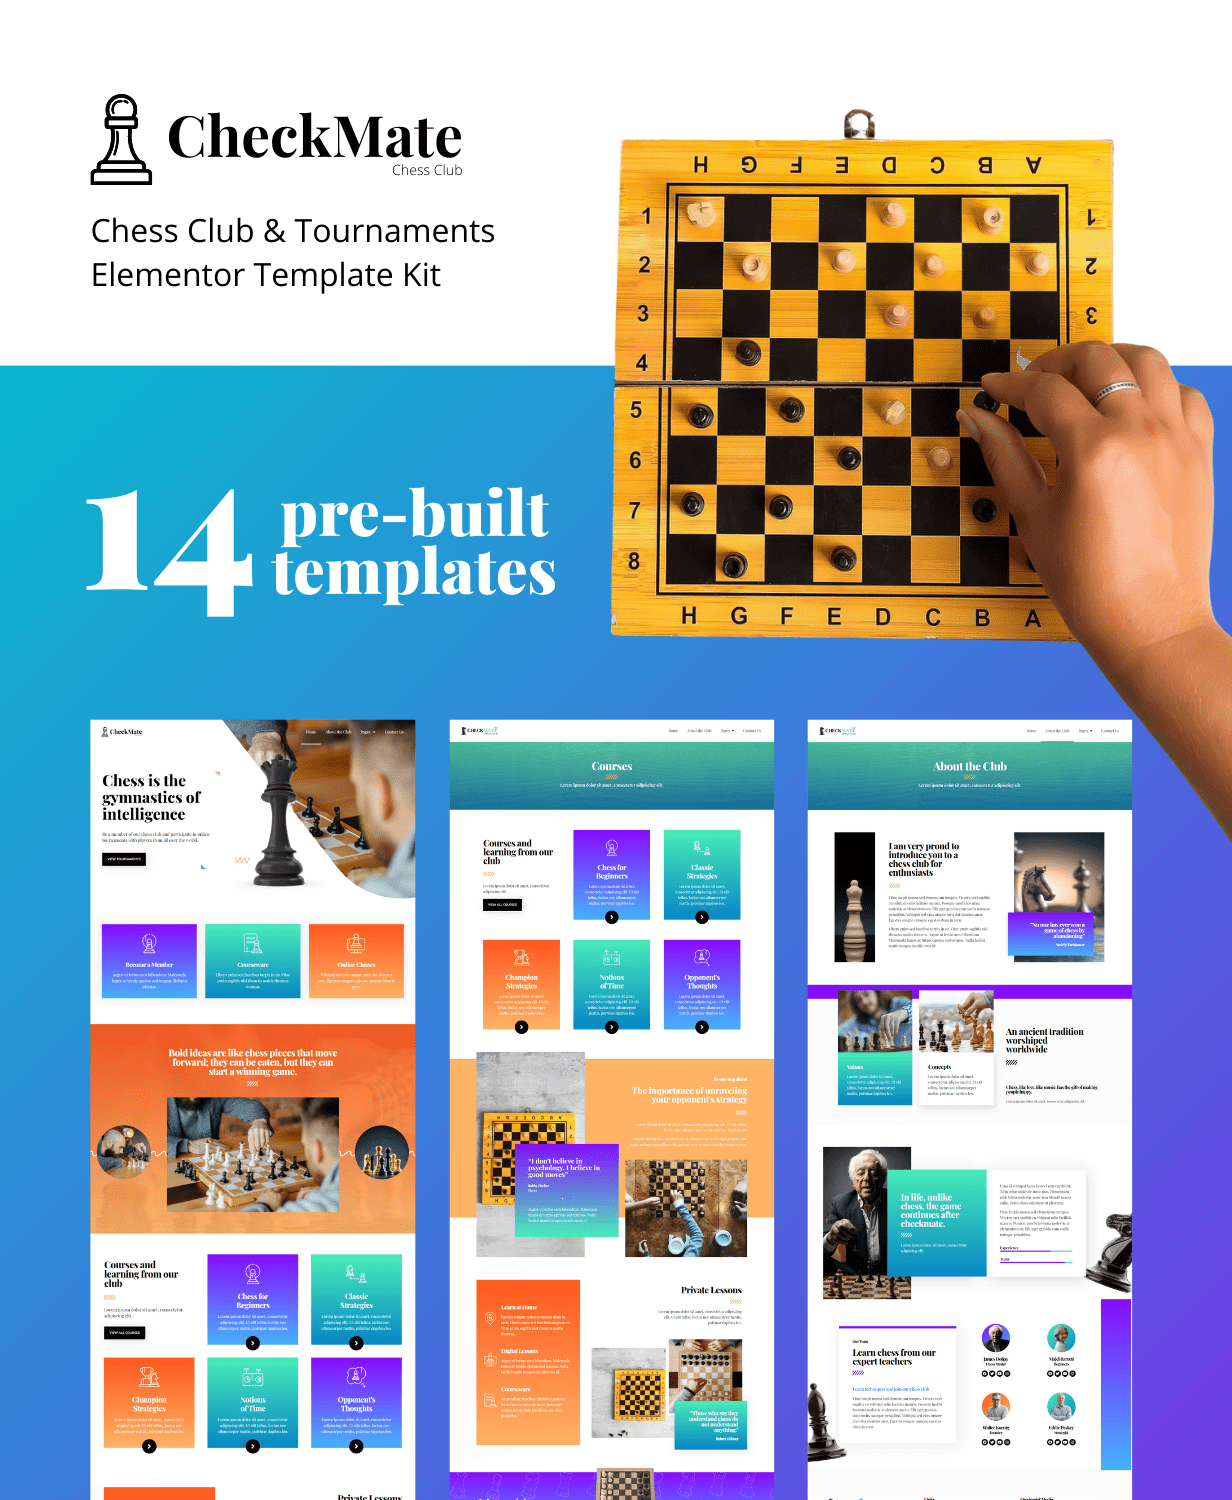 CheckMate - Schachclub & Turniere Elementor Template Kit - 1